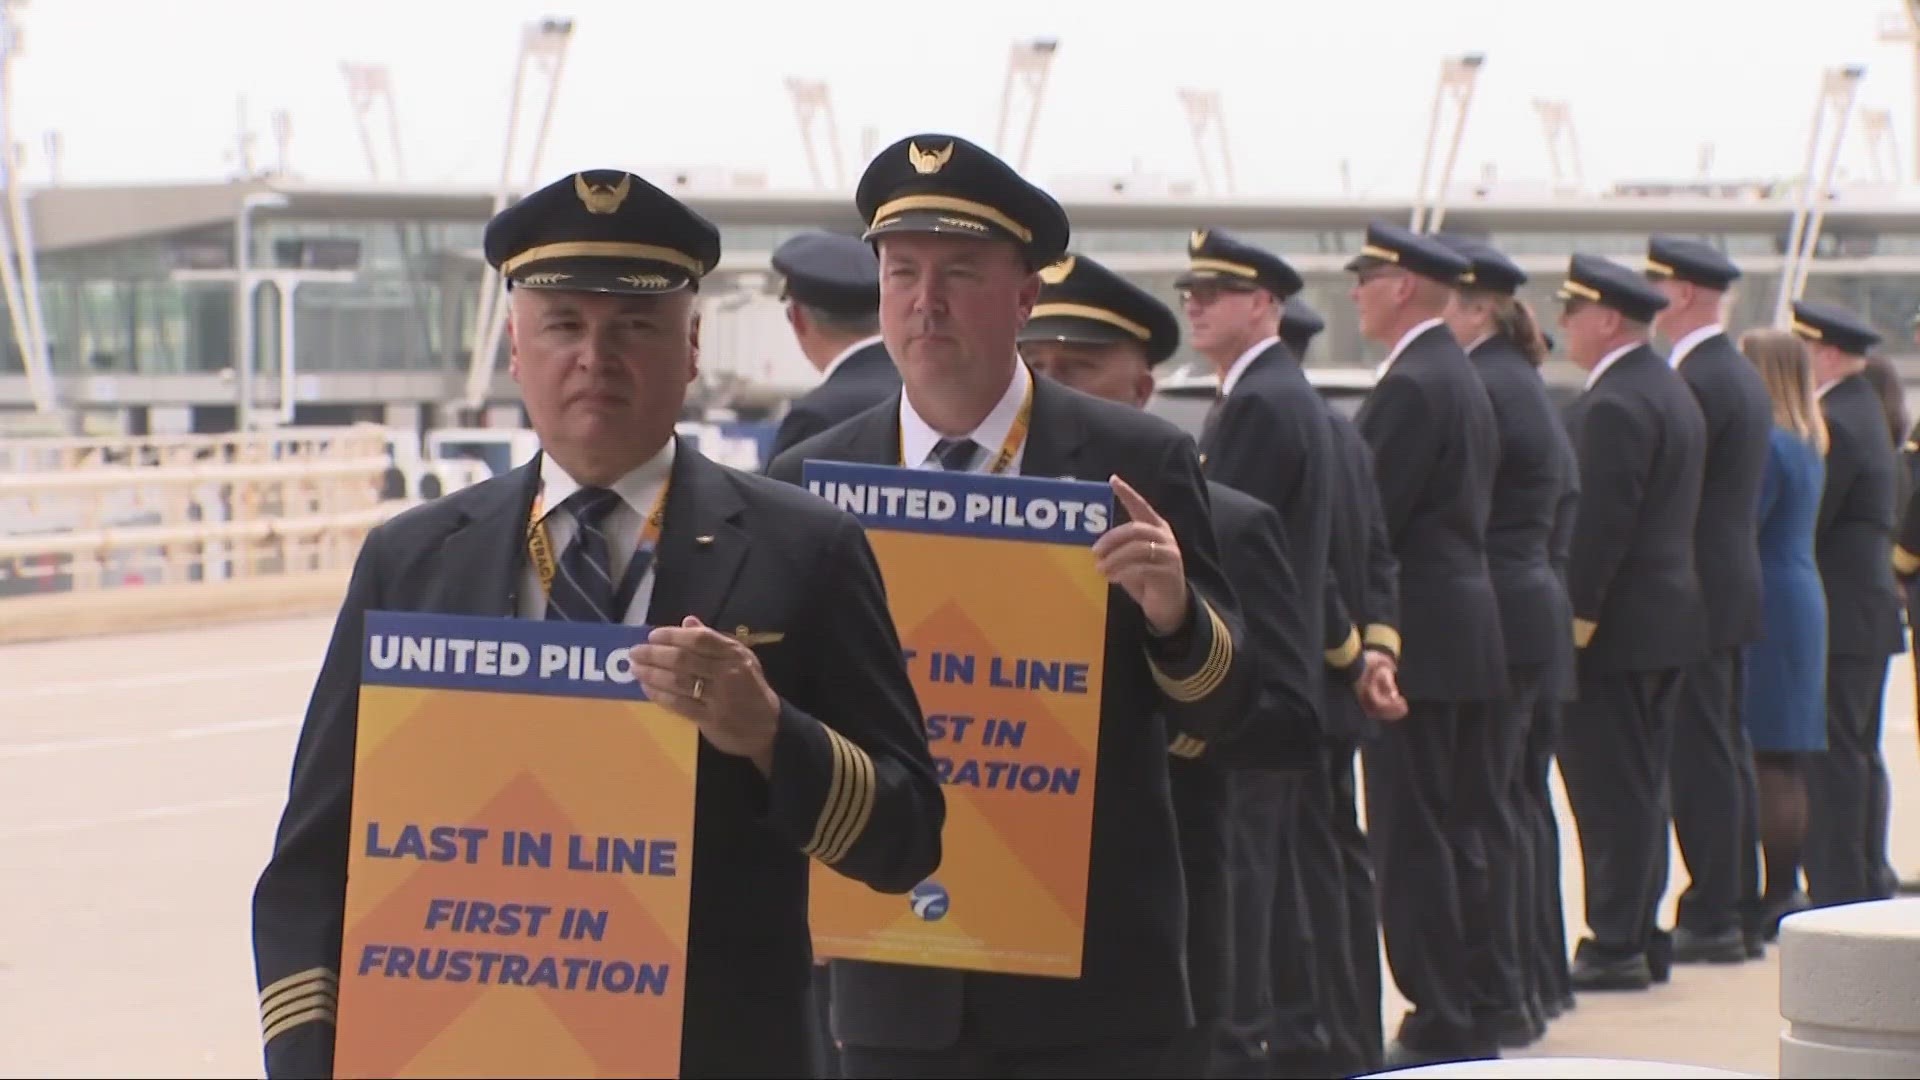 The picket is one of 10 scheduled at airports across the nation.